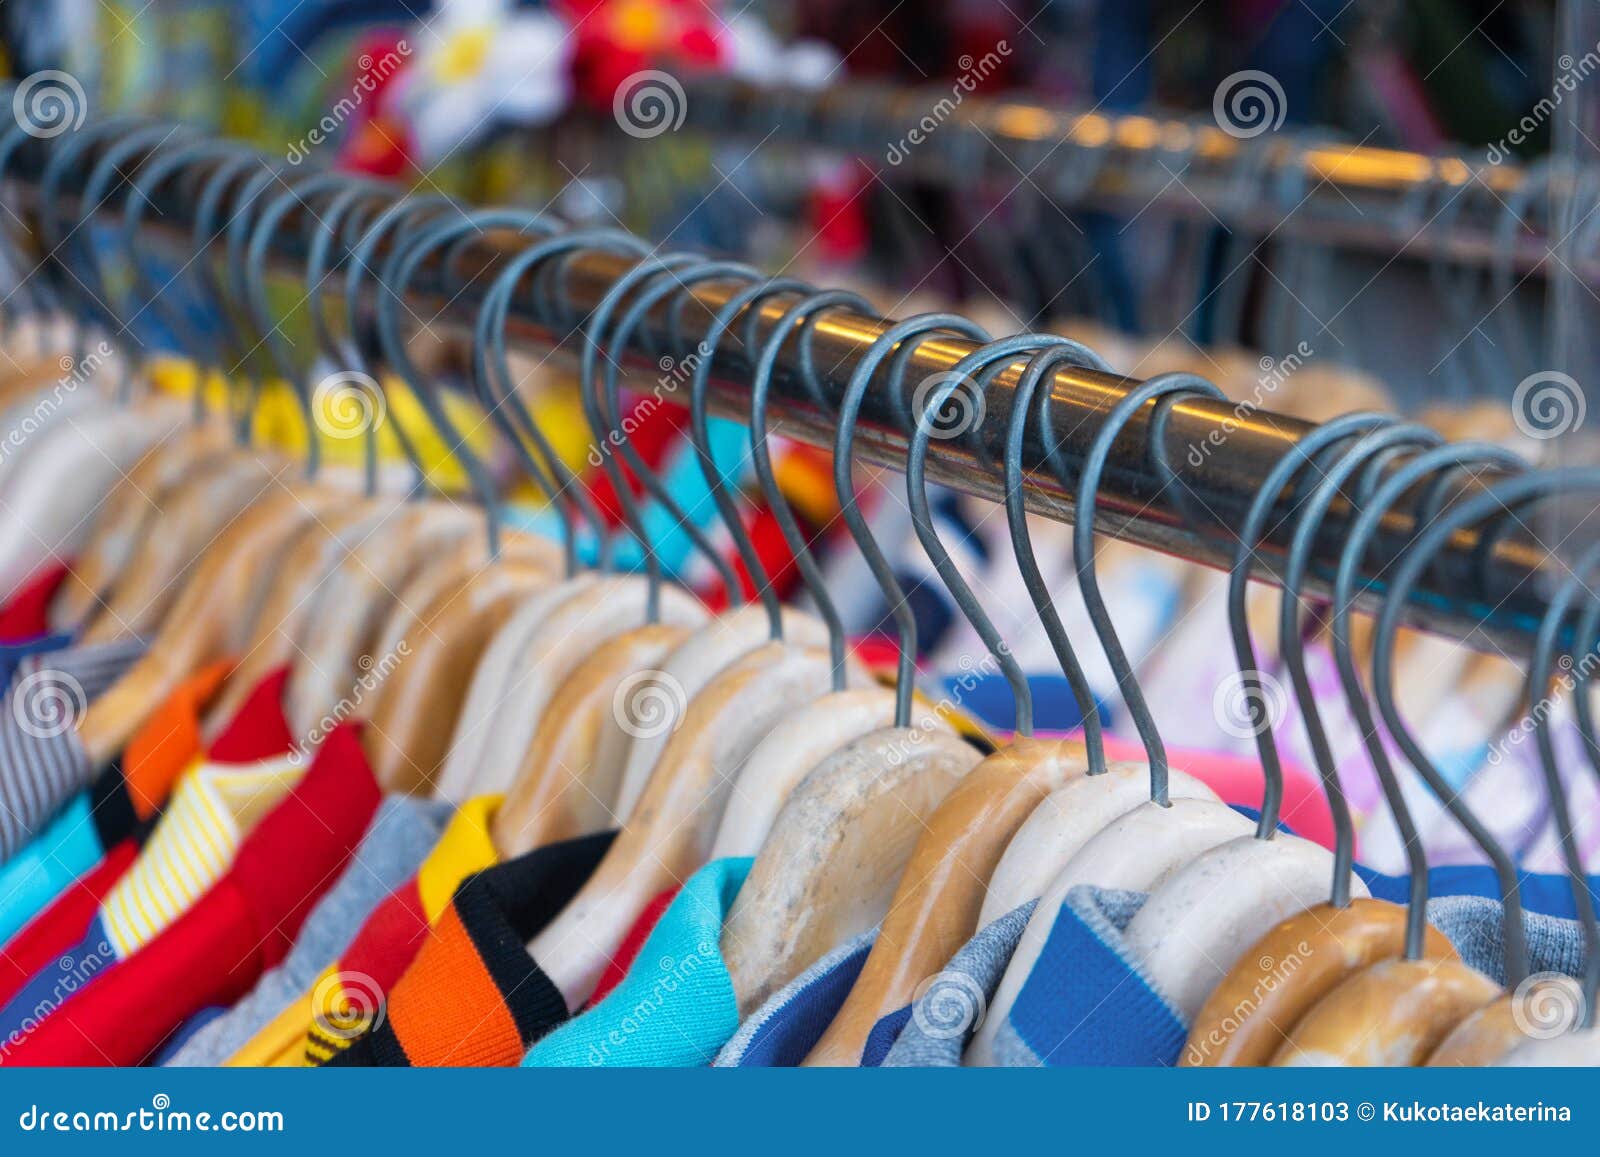 Multi-colored T-shirts on a Hanger. Clothing Store Stock Image - Image ...